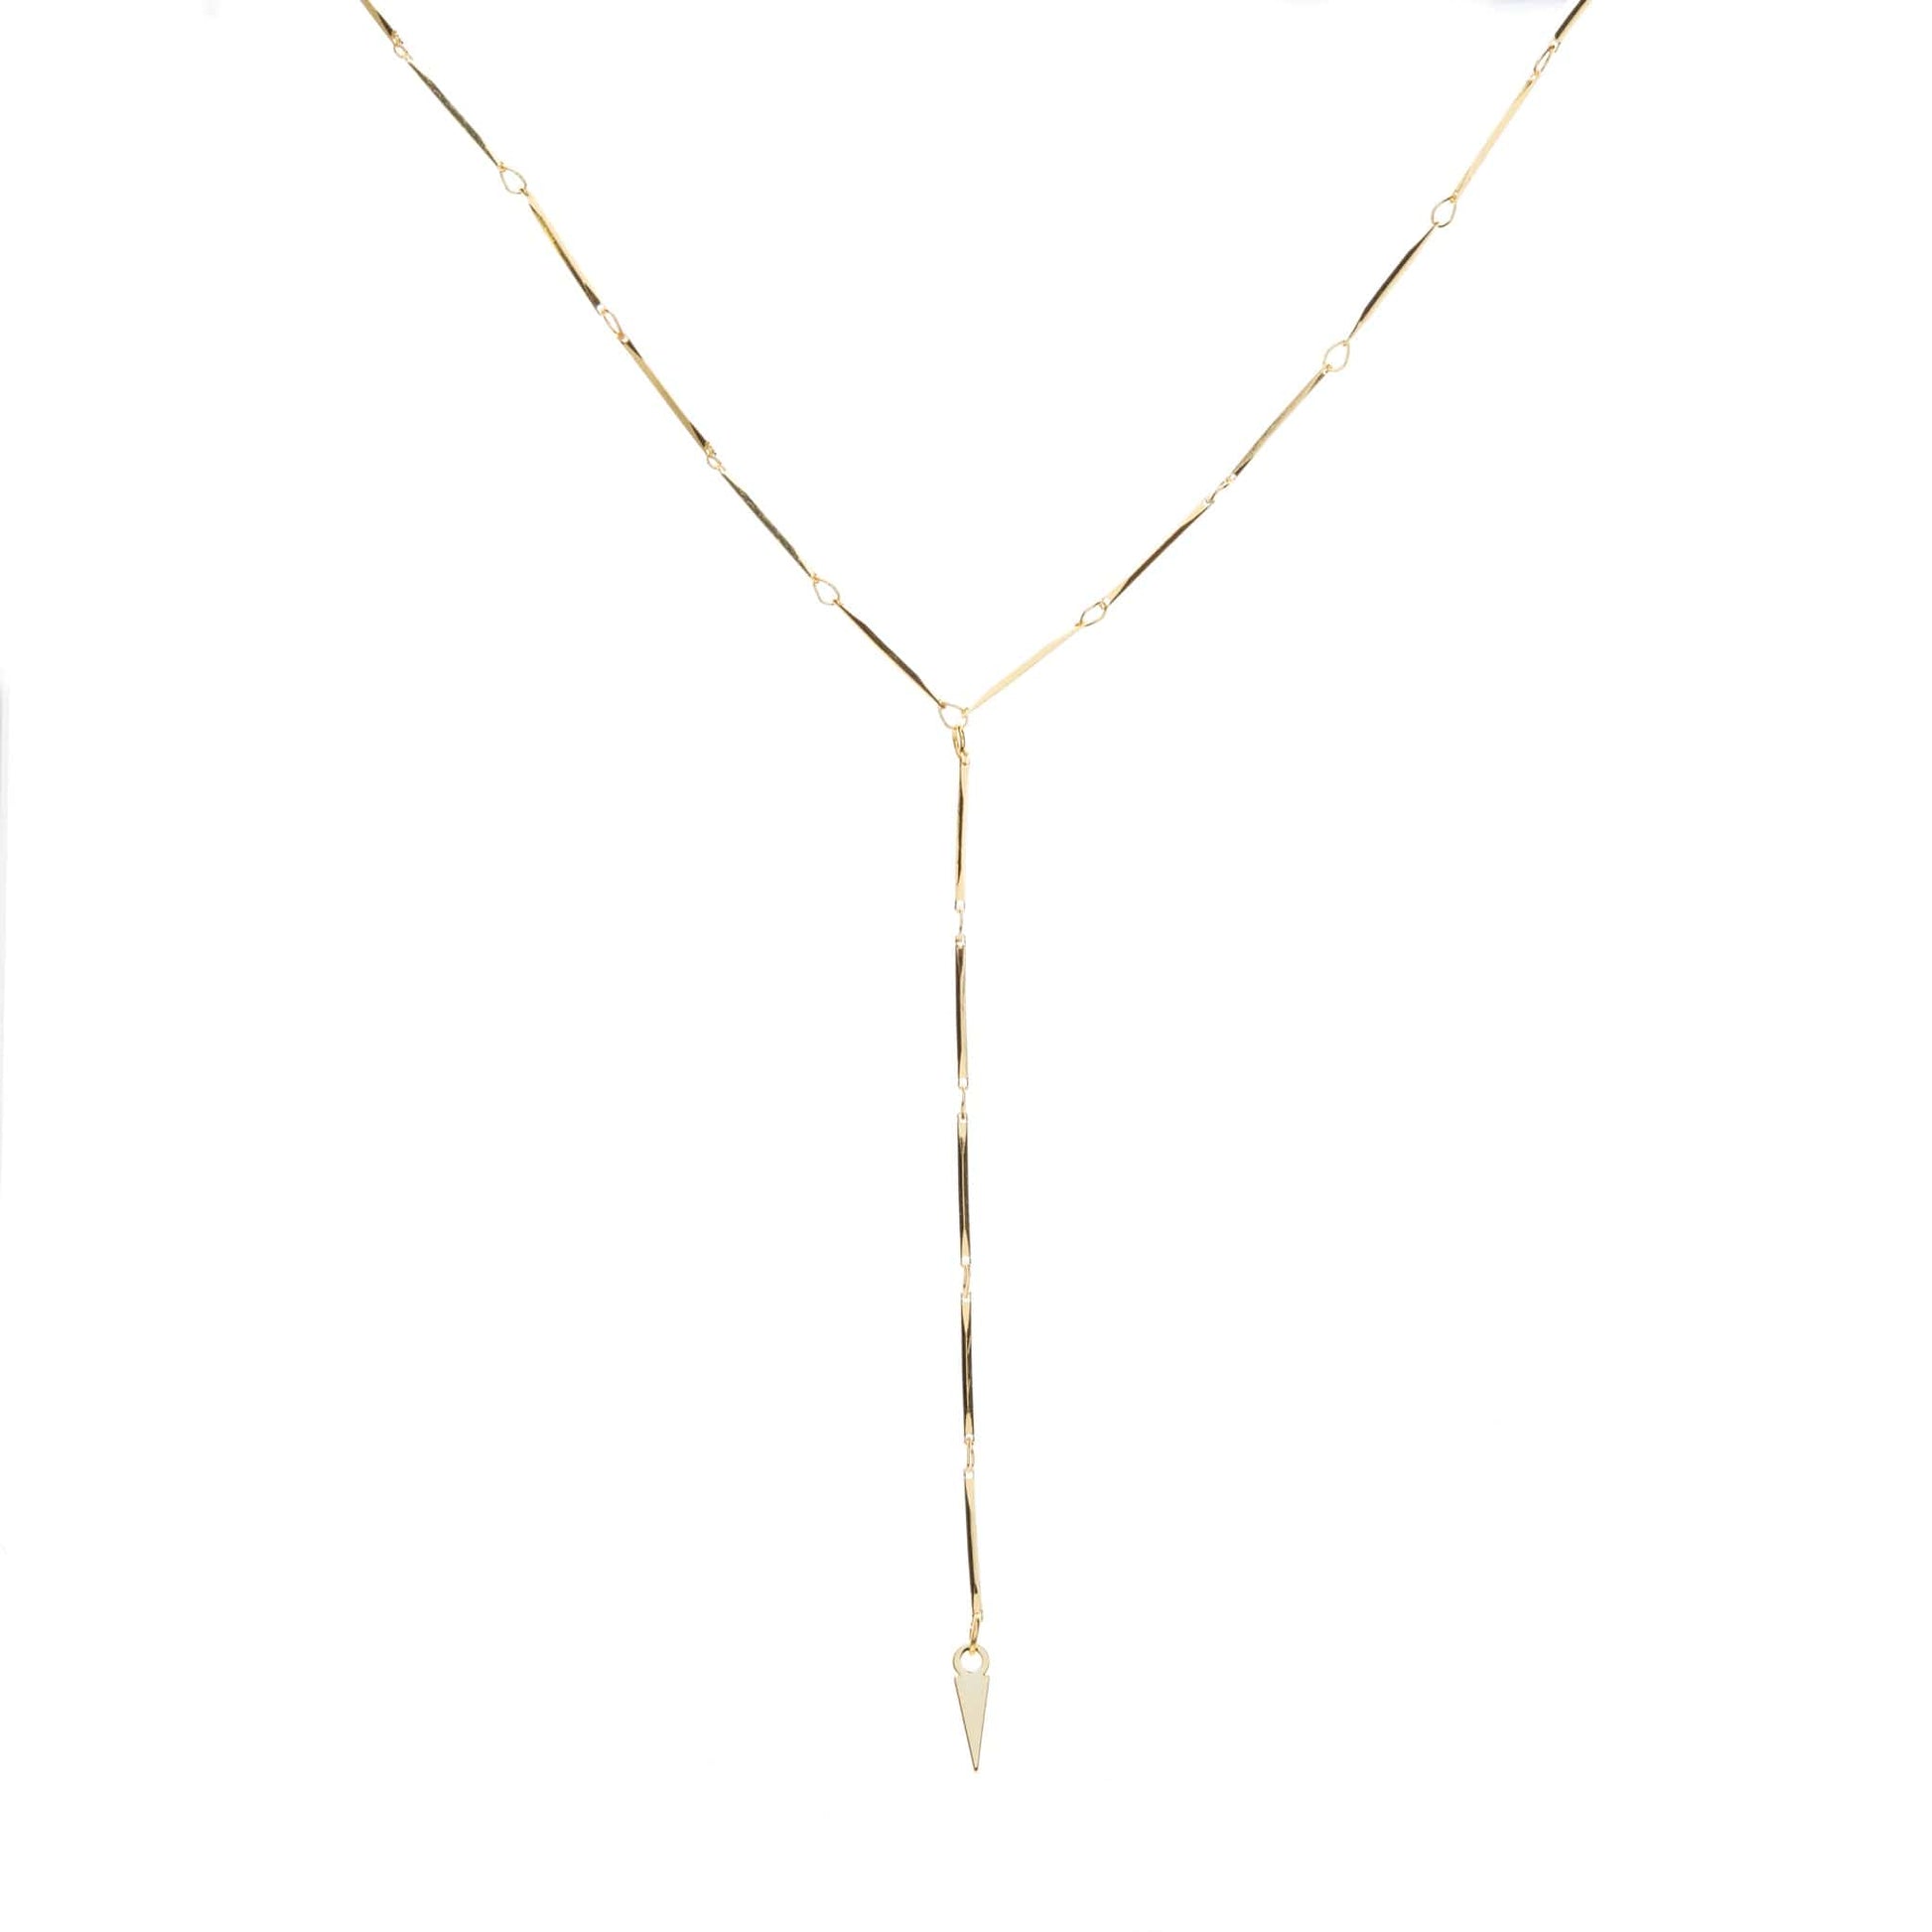 Long Link Lariat Layering necklace. Spear drop